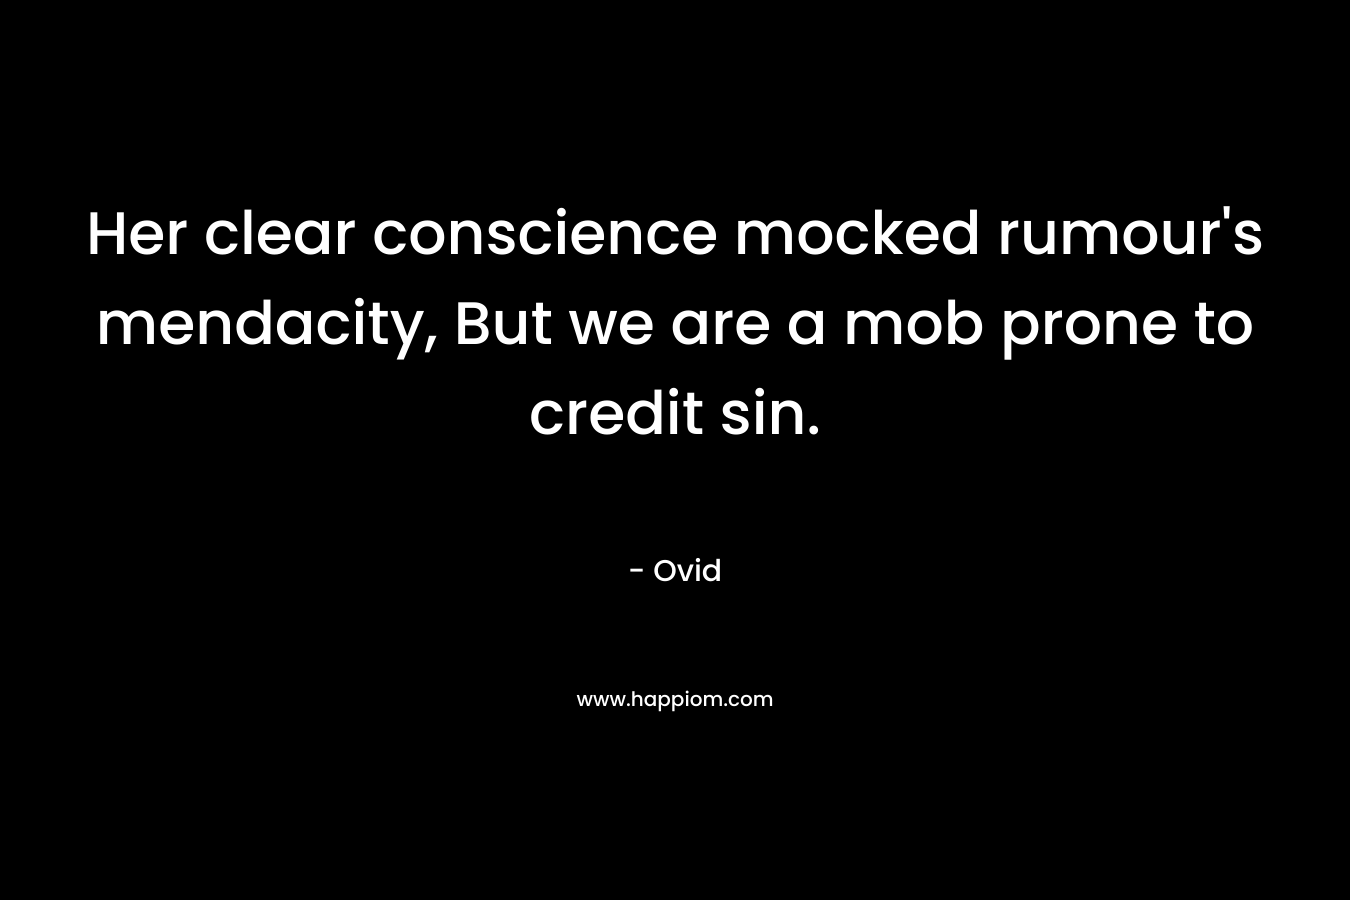 Her clear conscience mocked rumour's mendacity, But we are a mob prone to credit sin.